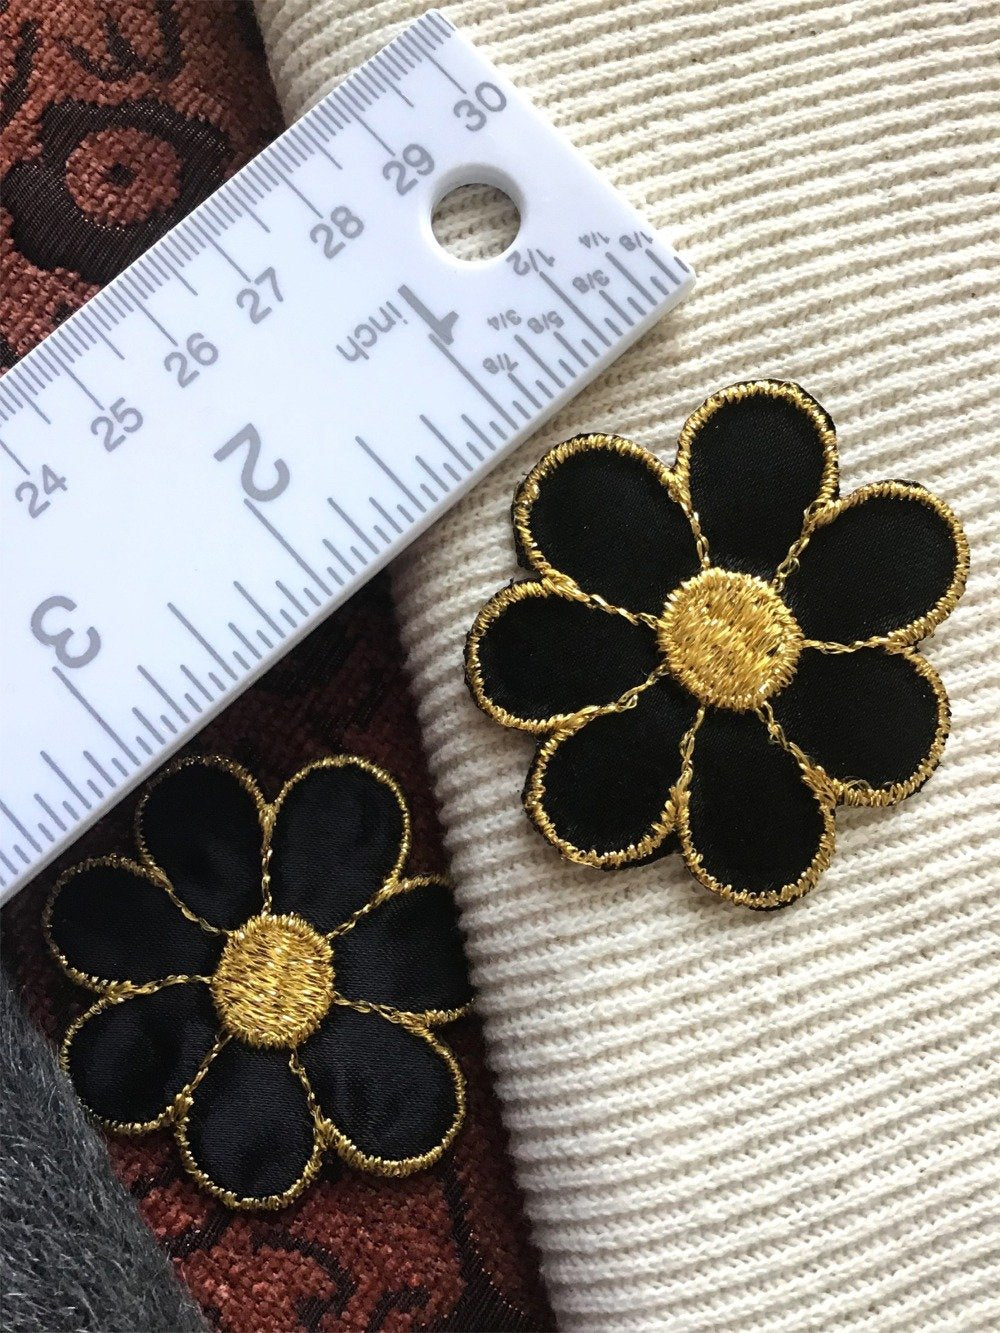 Vintage Metallic Gold Black Flower Decorative Iron-on Embroidery Applique Patches #5089